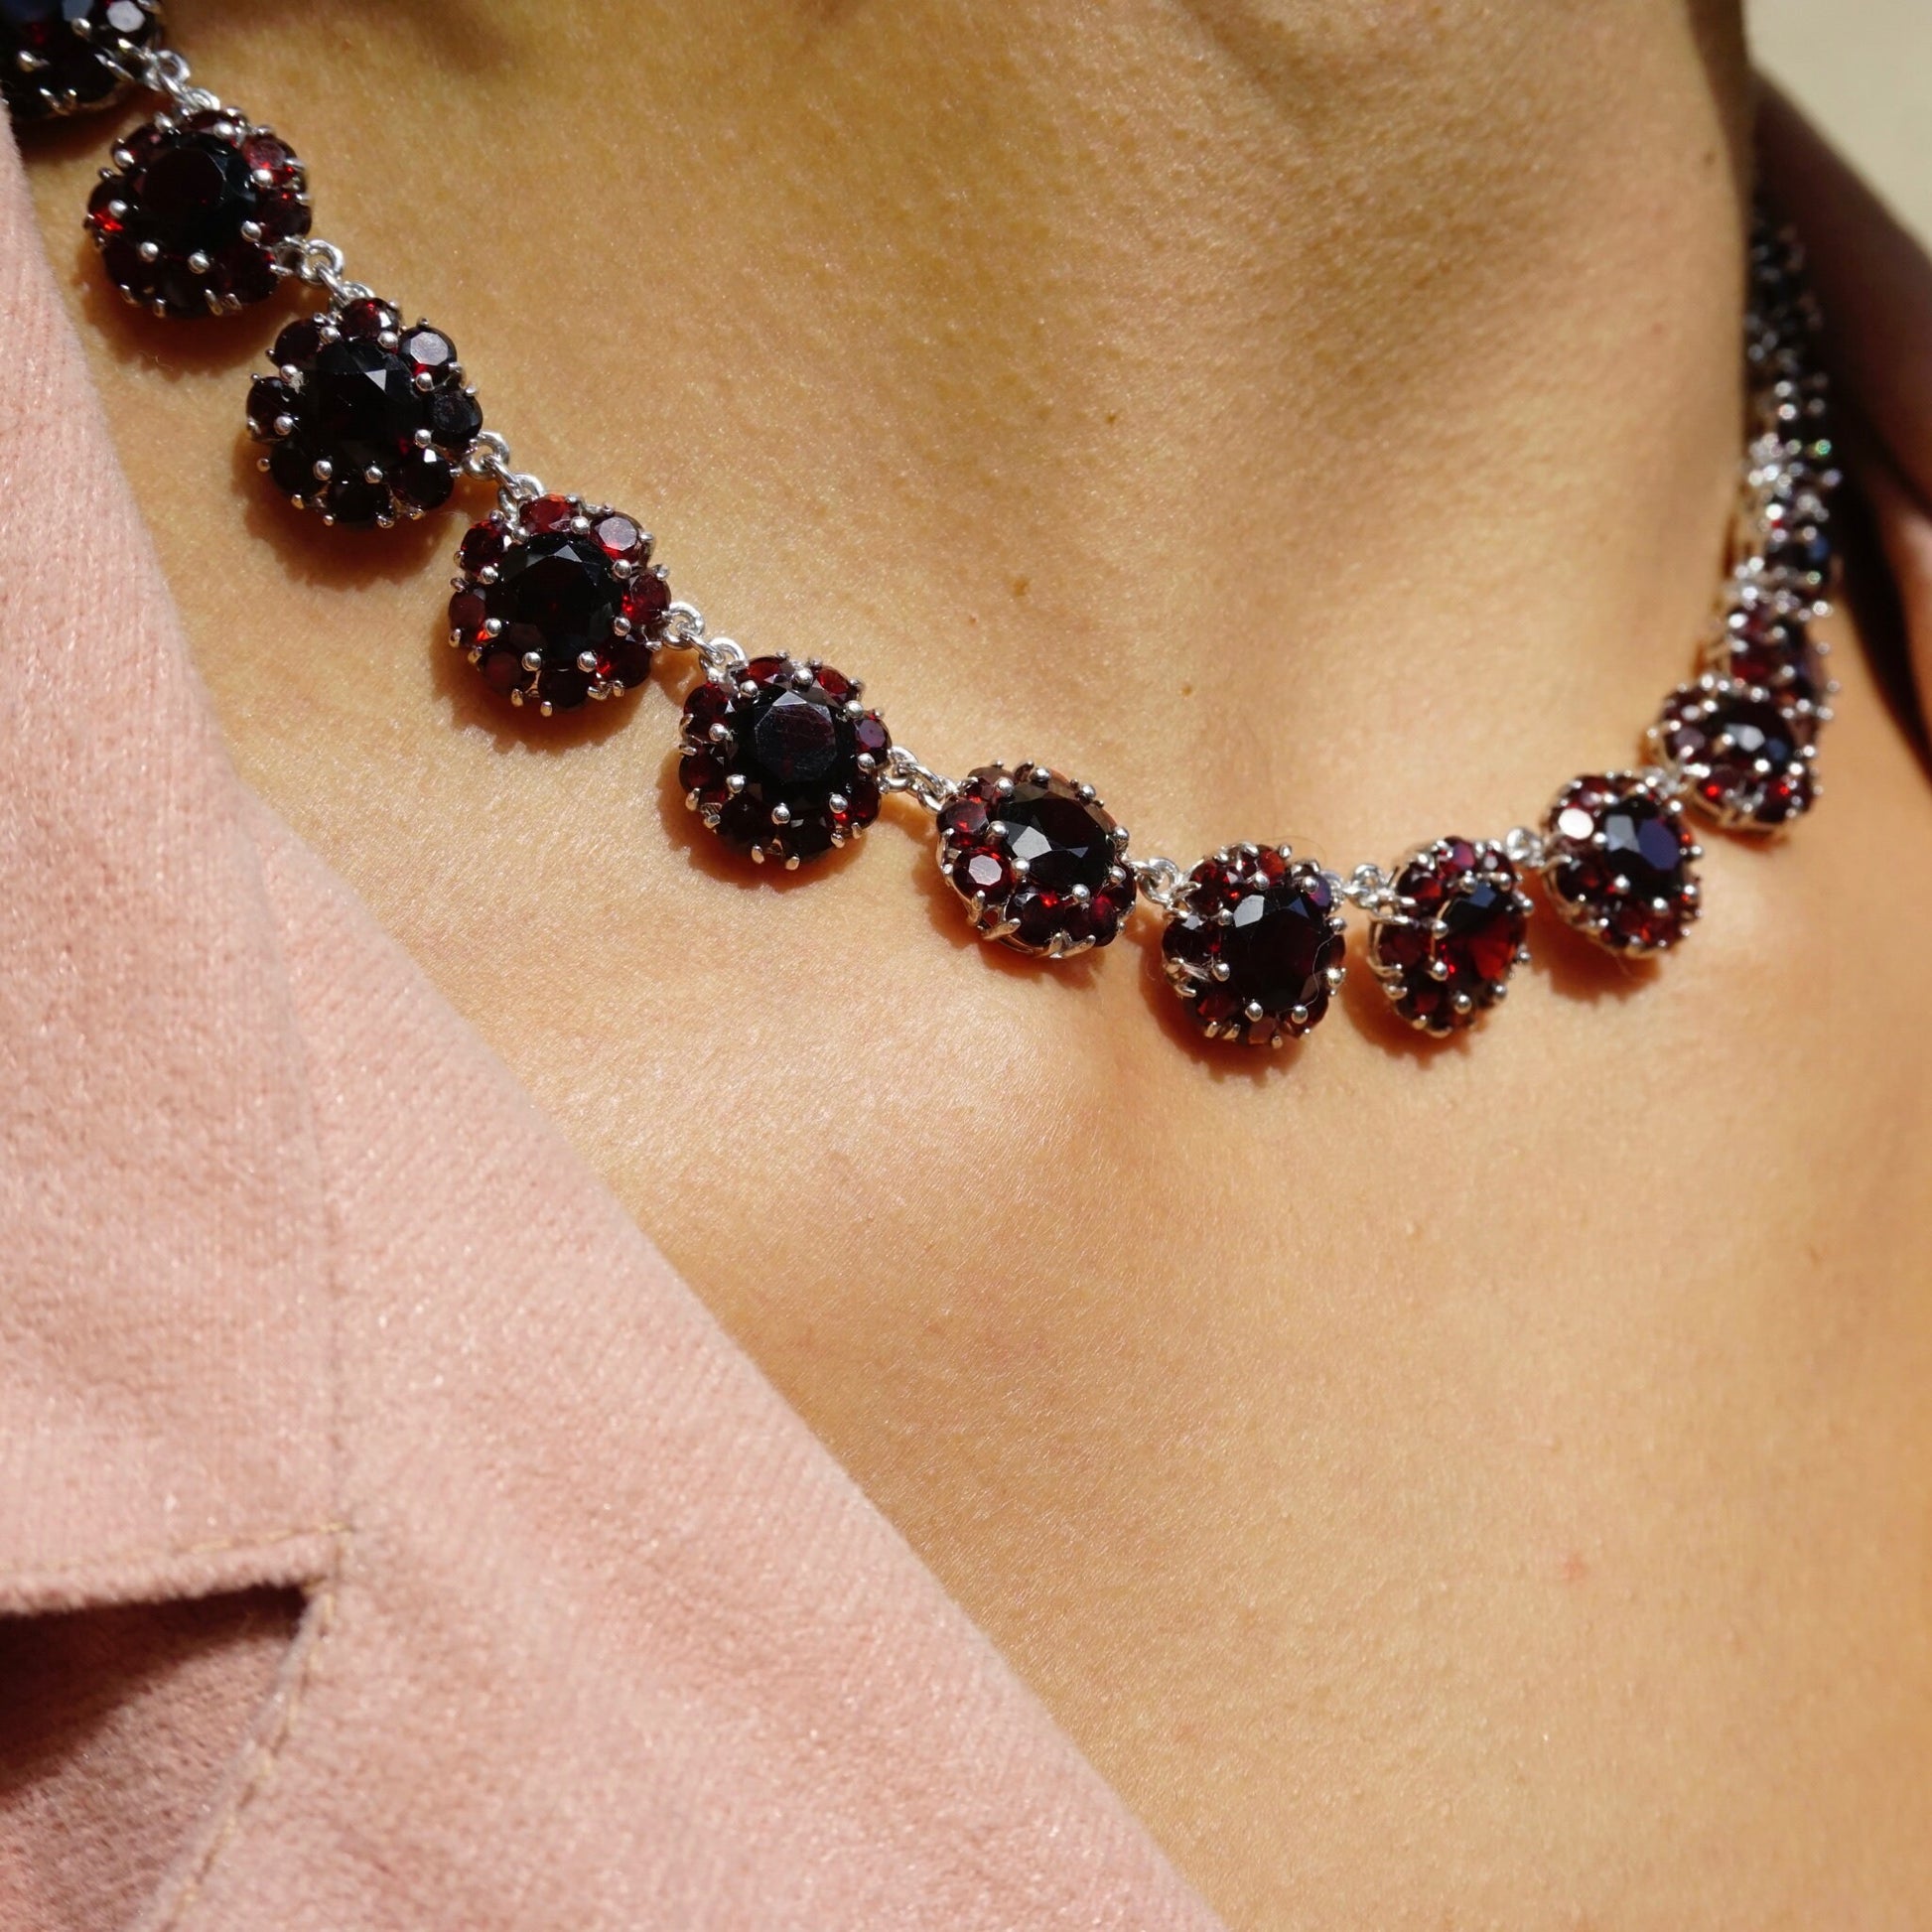 Vintage sterling silver garnet glass stone choker necklace with beautiful deep red stones set in an intricate beaded collar design, showcasing the stunning contrast between the gleaming silver and rich garnet hues.